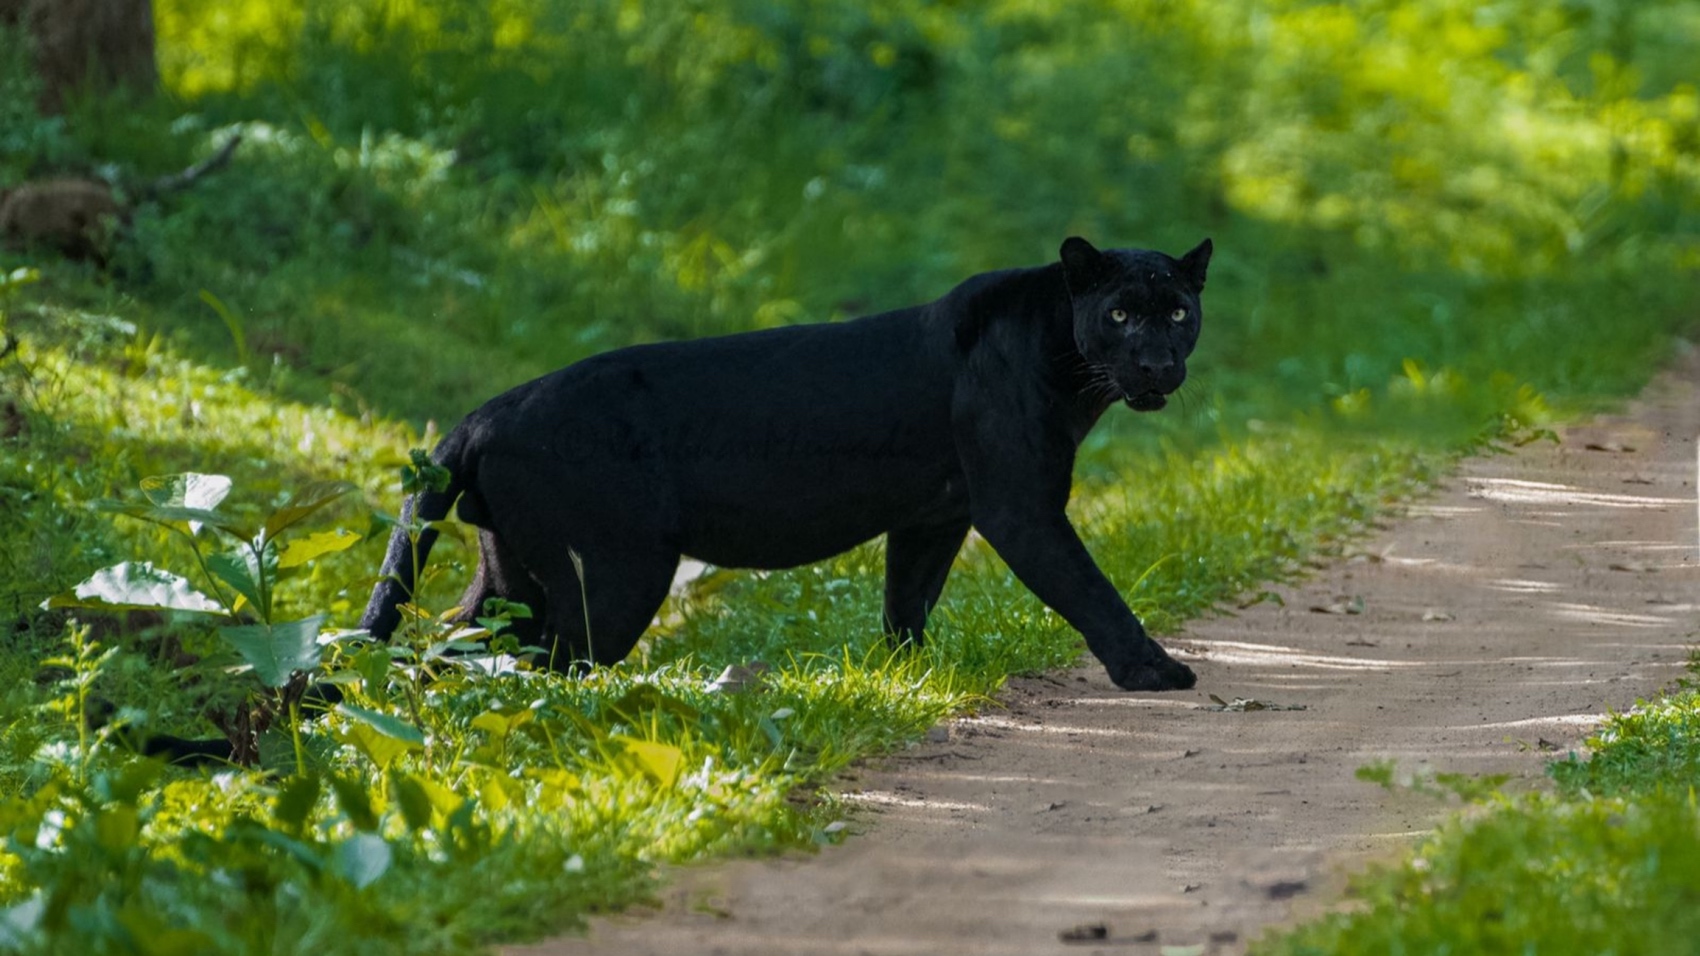 Black panther crossing a trail